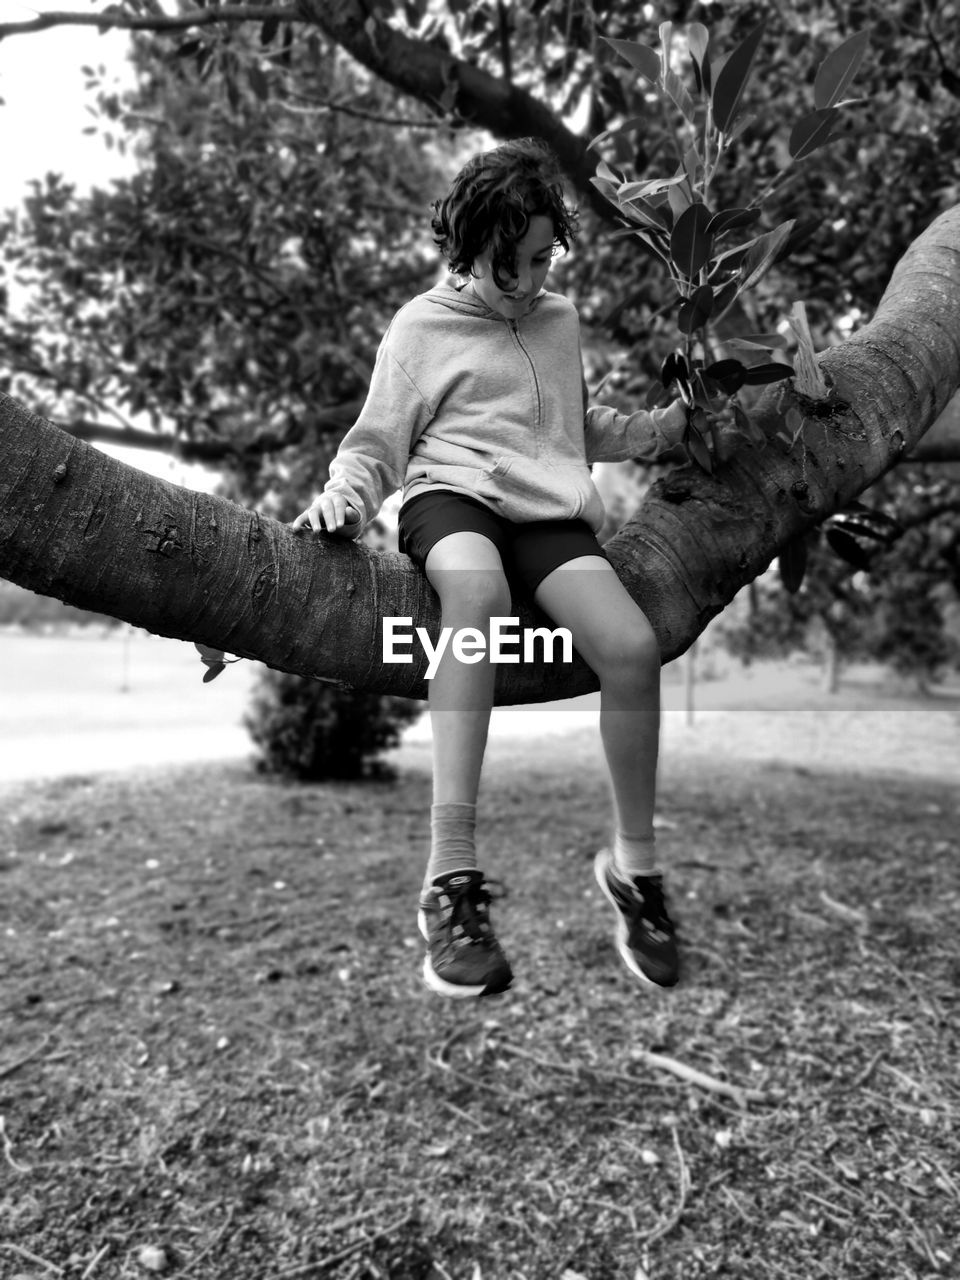 tree, full length, plant, black and white, leisure activity, lifestyles, nature, casual clothing, monochrome photography, day, one person, black, women, white, monochrome, child, childhood, adult, outdoors, footwear, land, spring, female, person, young adult, men, park, rear view, park - man made space, clothing, emotion